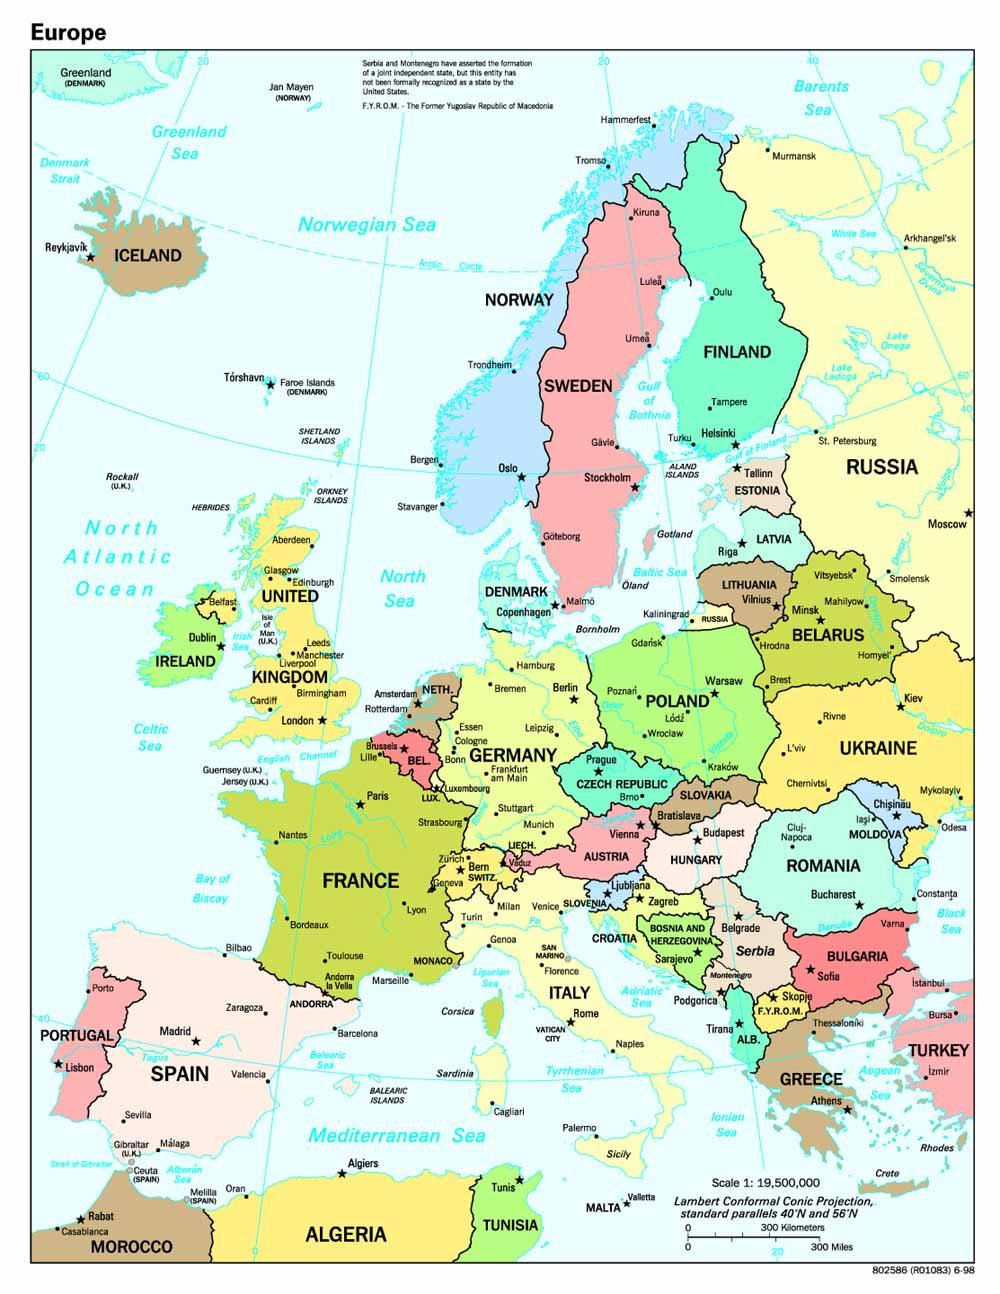 online-maps-europe-map-with-capitals